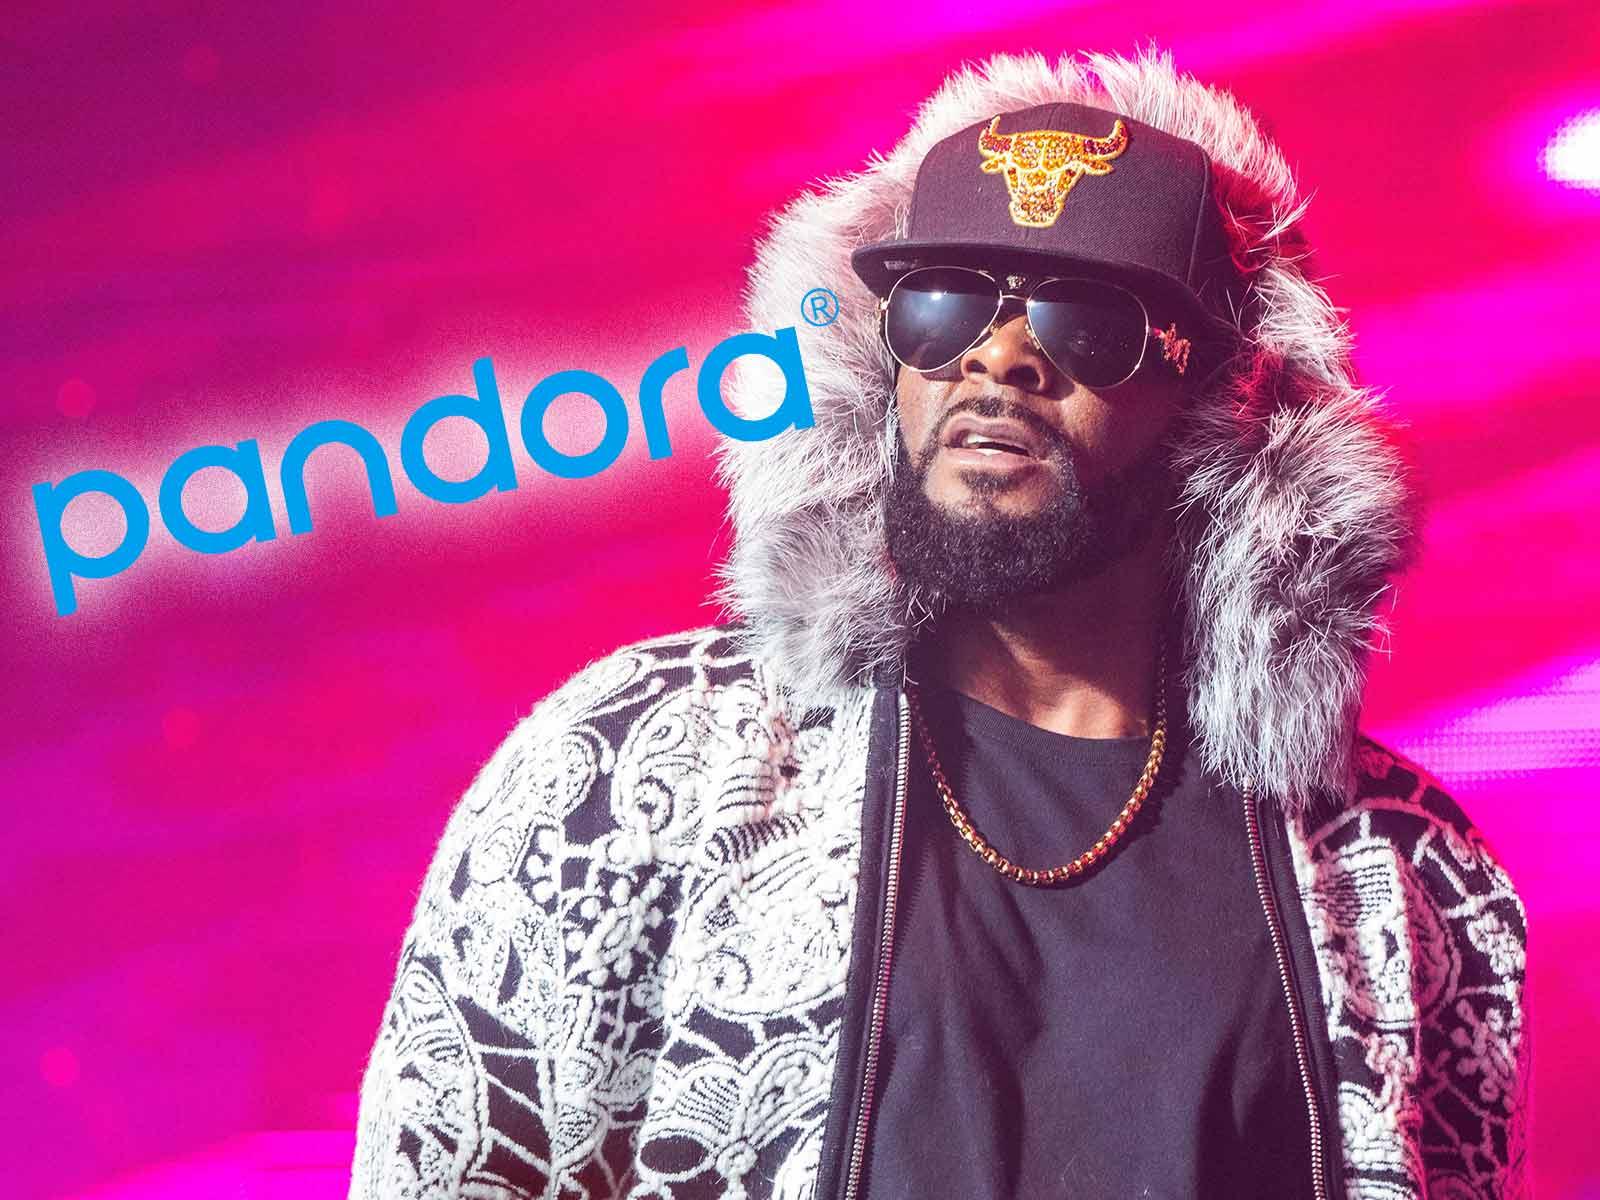 Pandora Is No Longer Actively Promoting R. Kelly Music